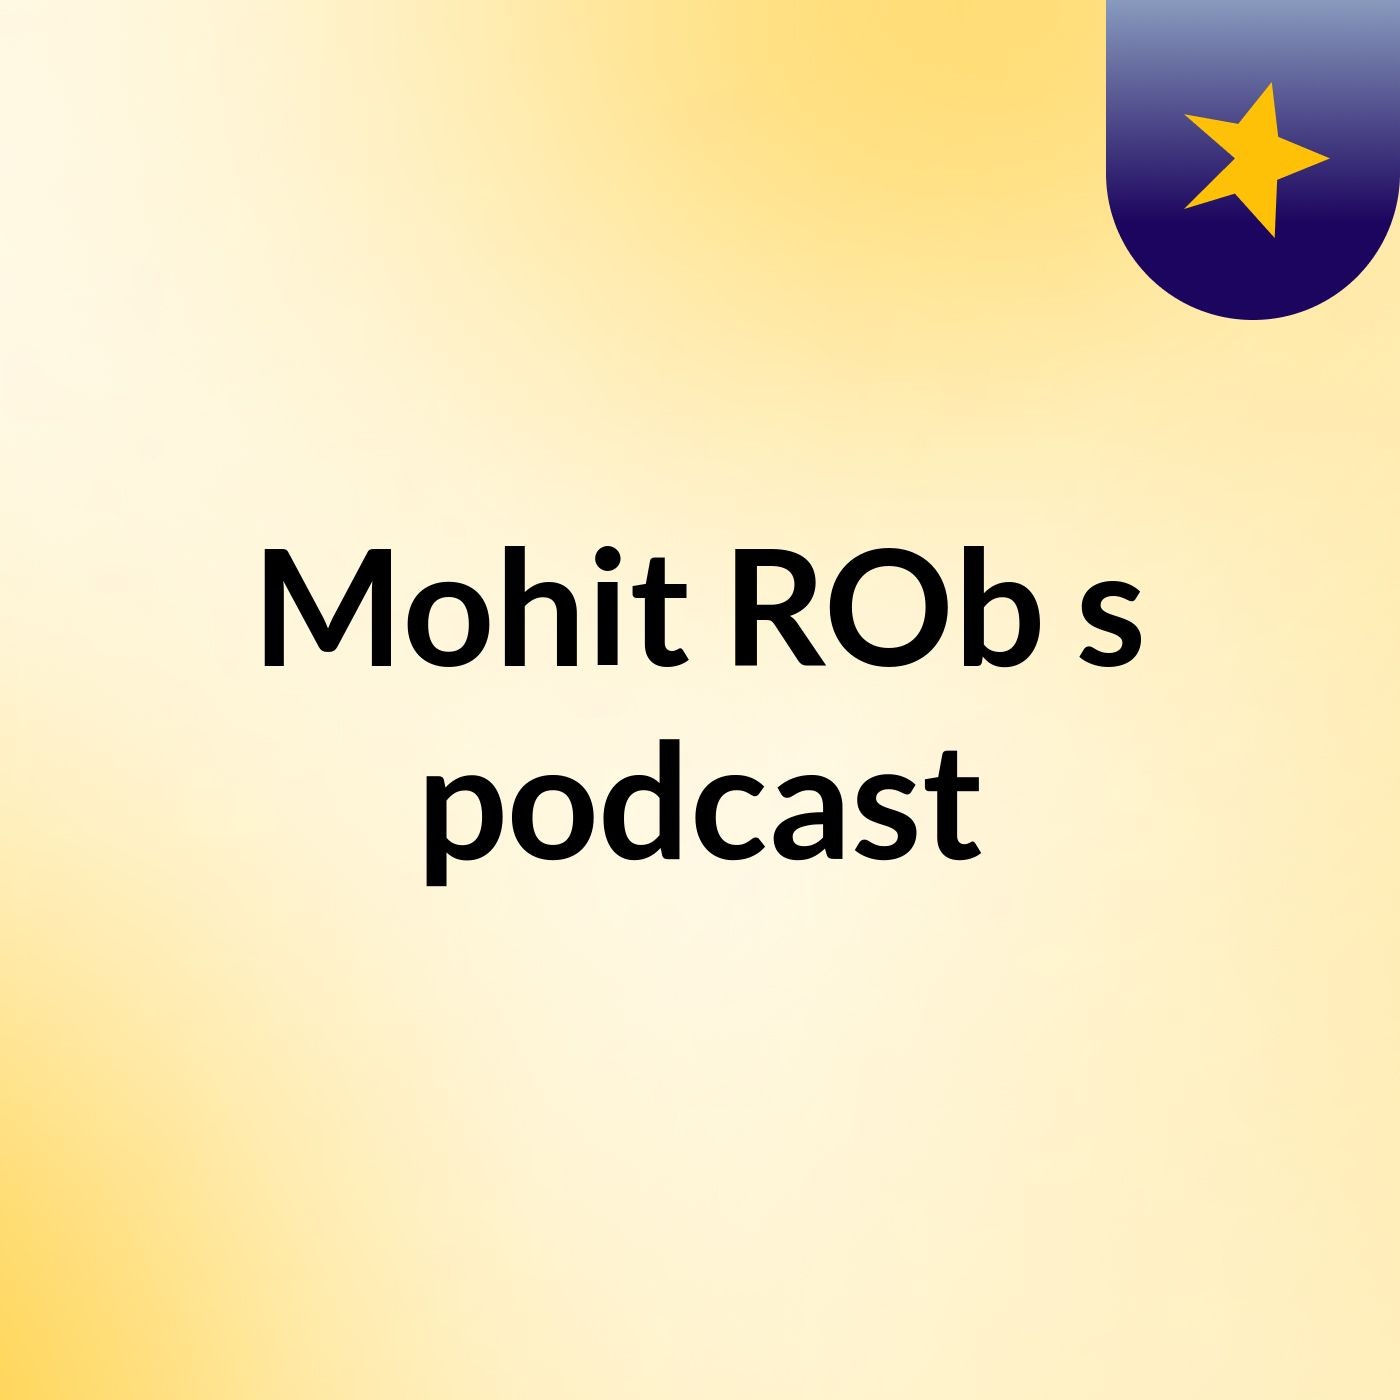 Episode 7 - Mohit ROb's podcast